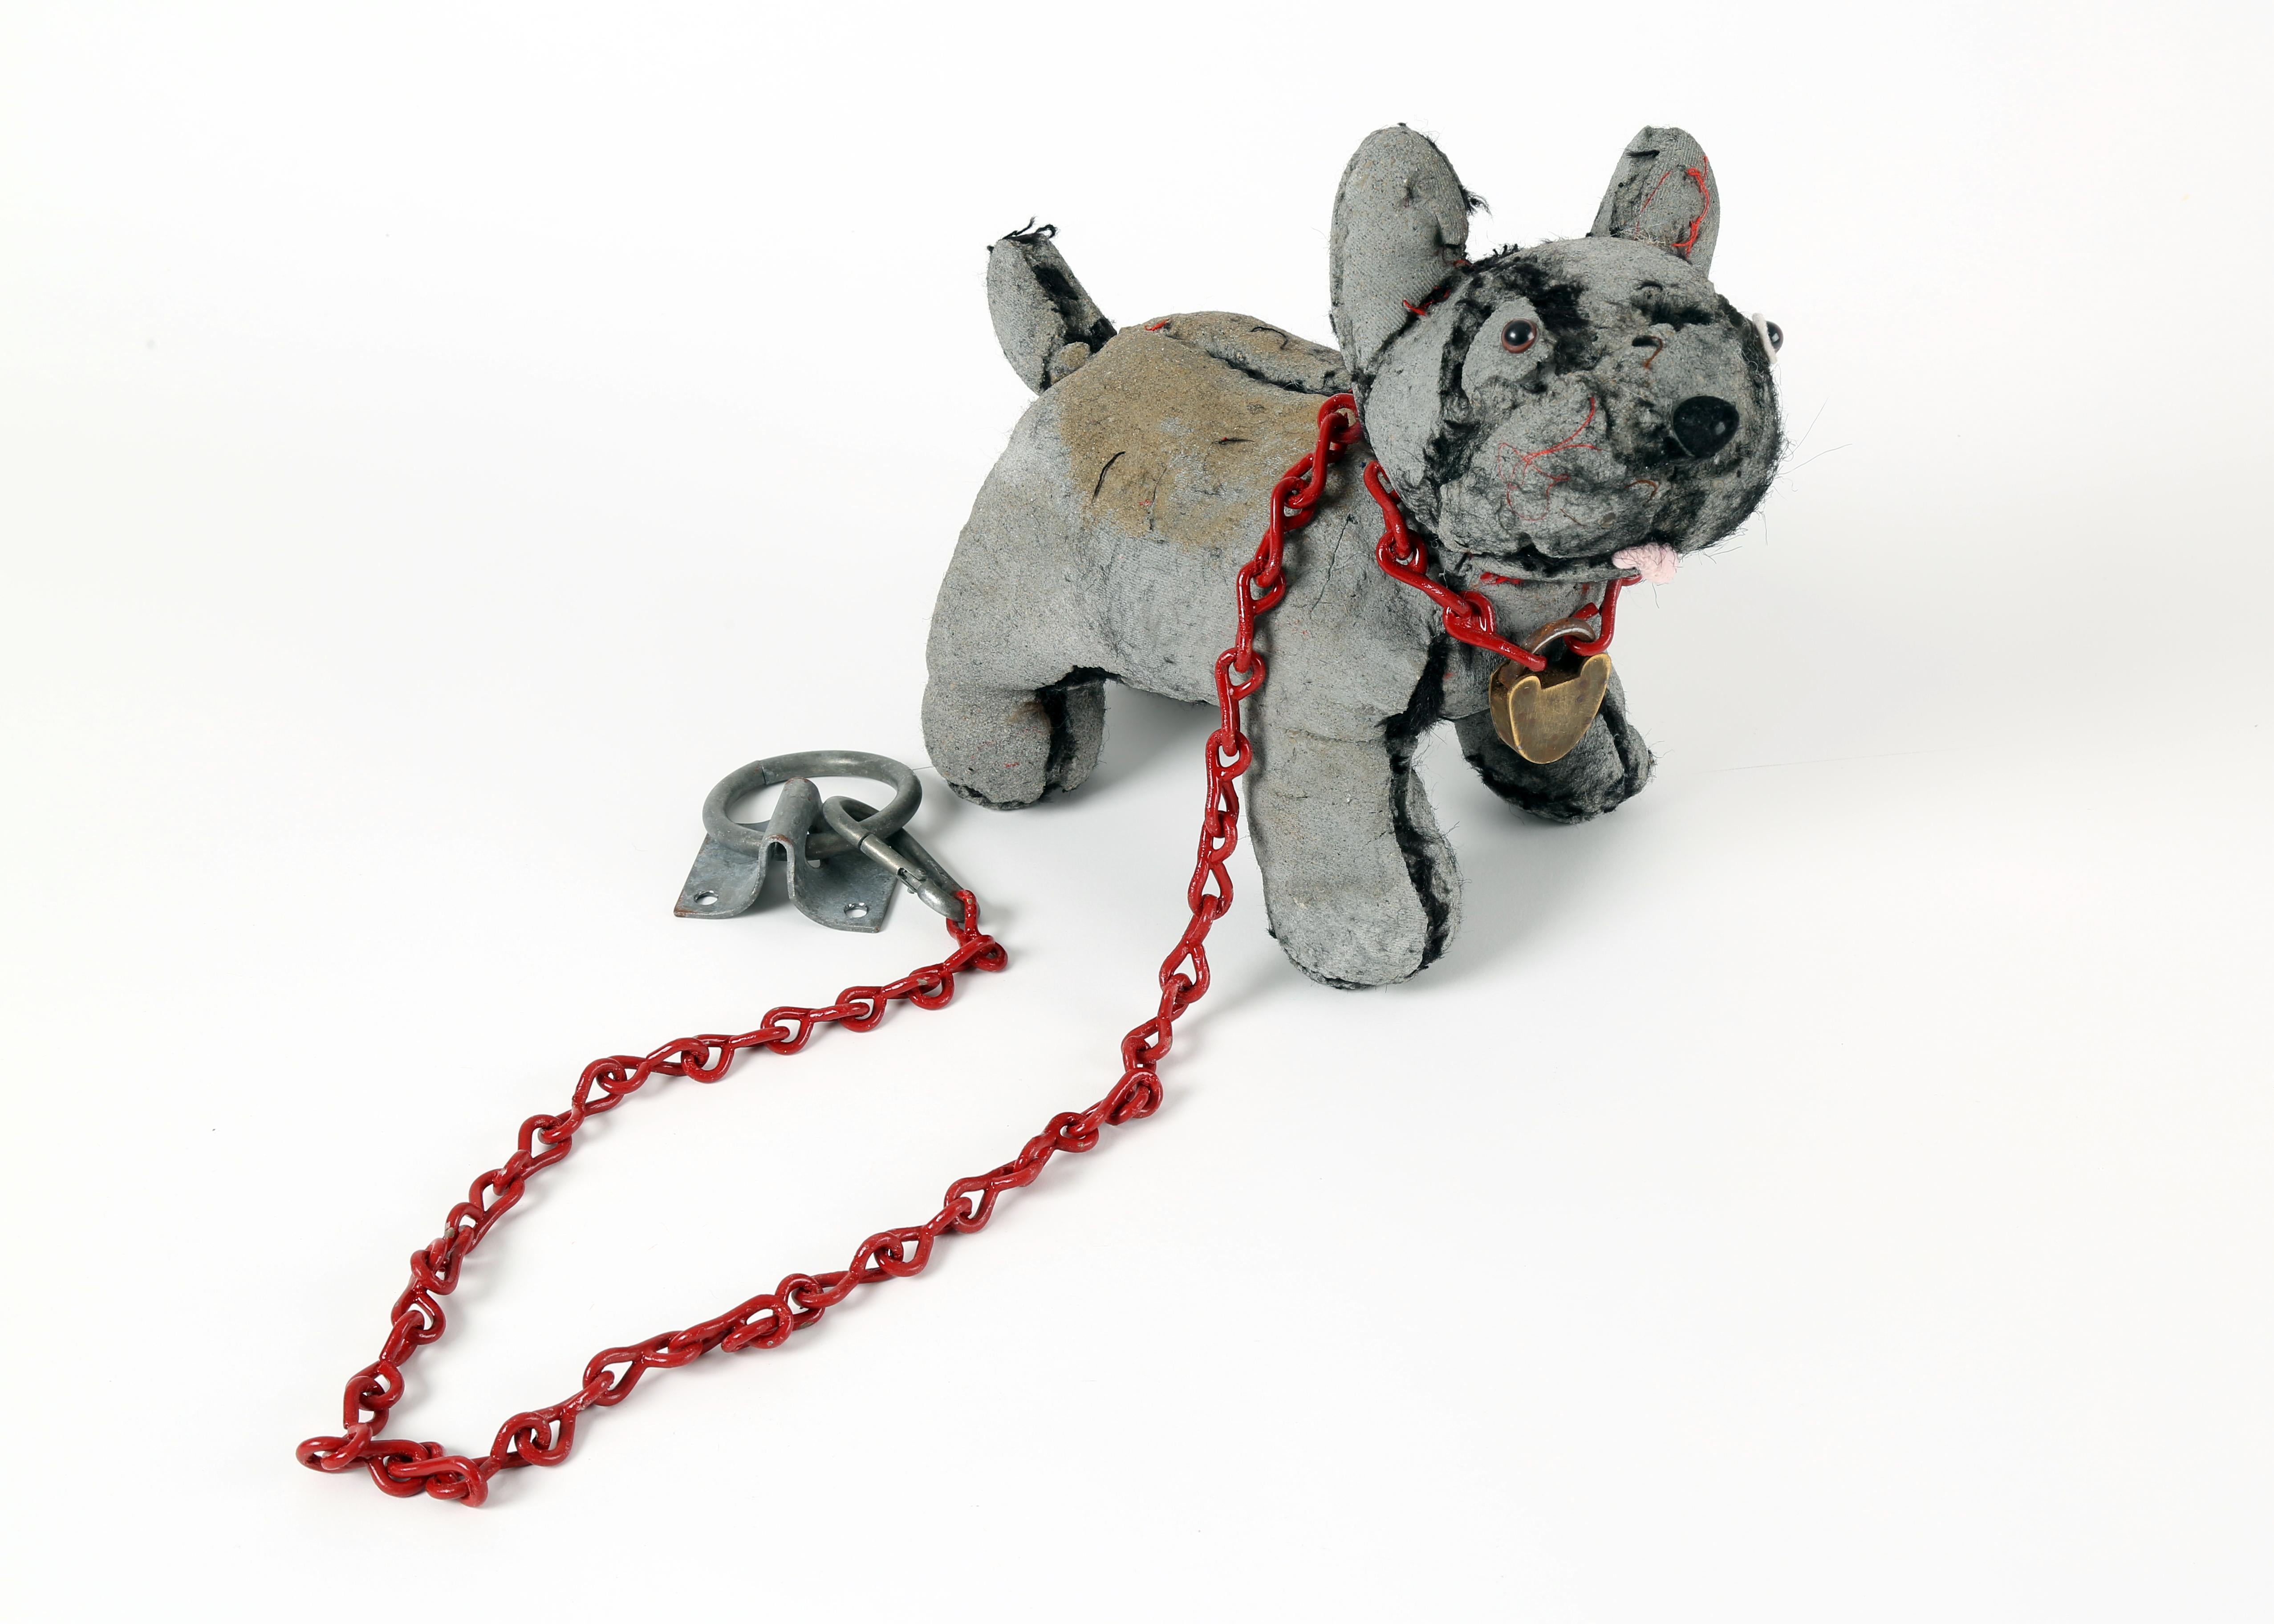 Ross Bonfanti
Terrier with Red Chain, 2015
Concrete, mixed media
9 1/2 x 11 x 5 1/4 inches  (24.1 x 27.9 x 13.3 cm)